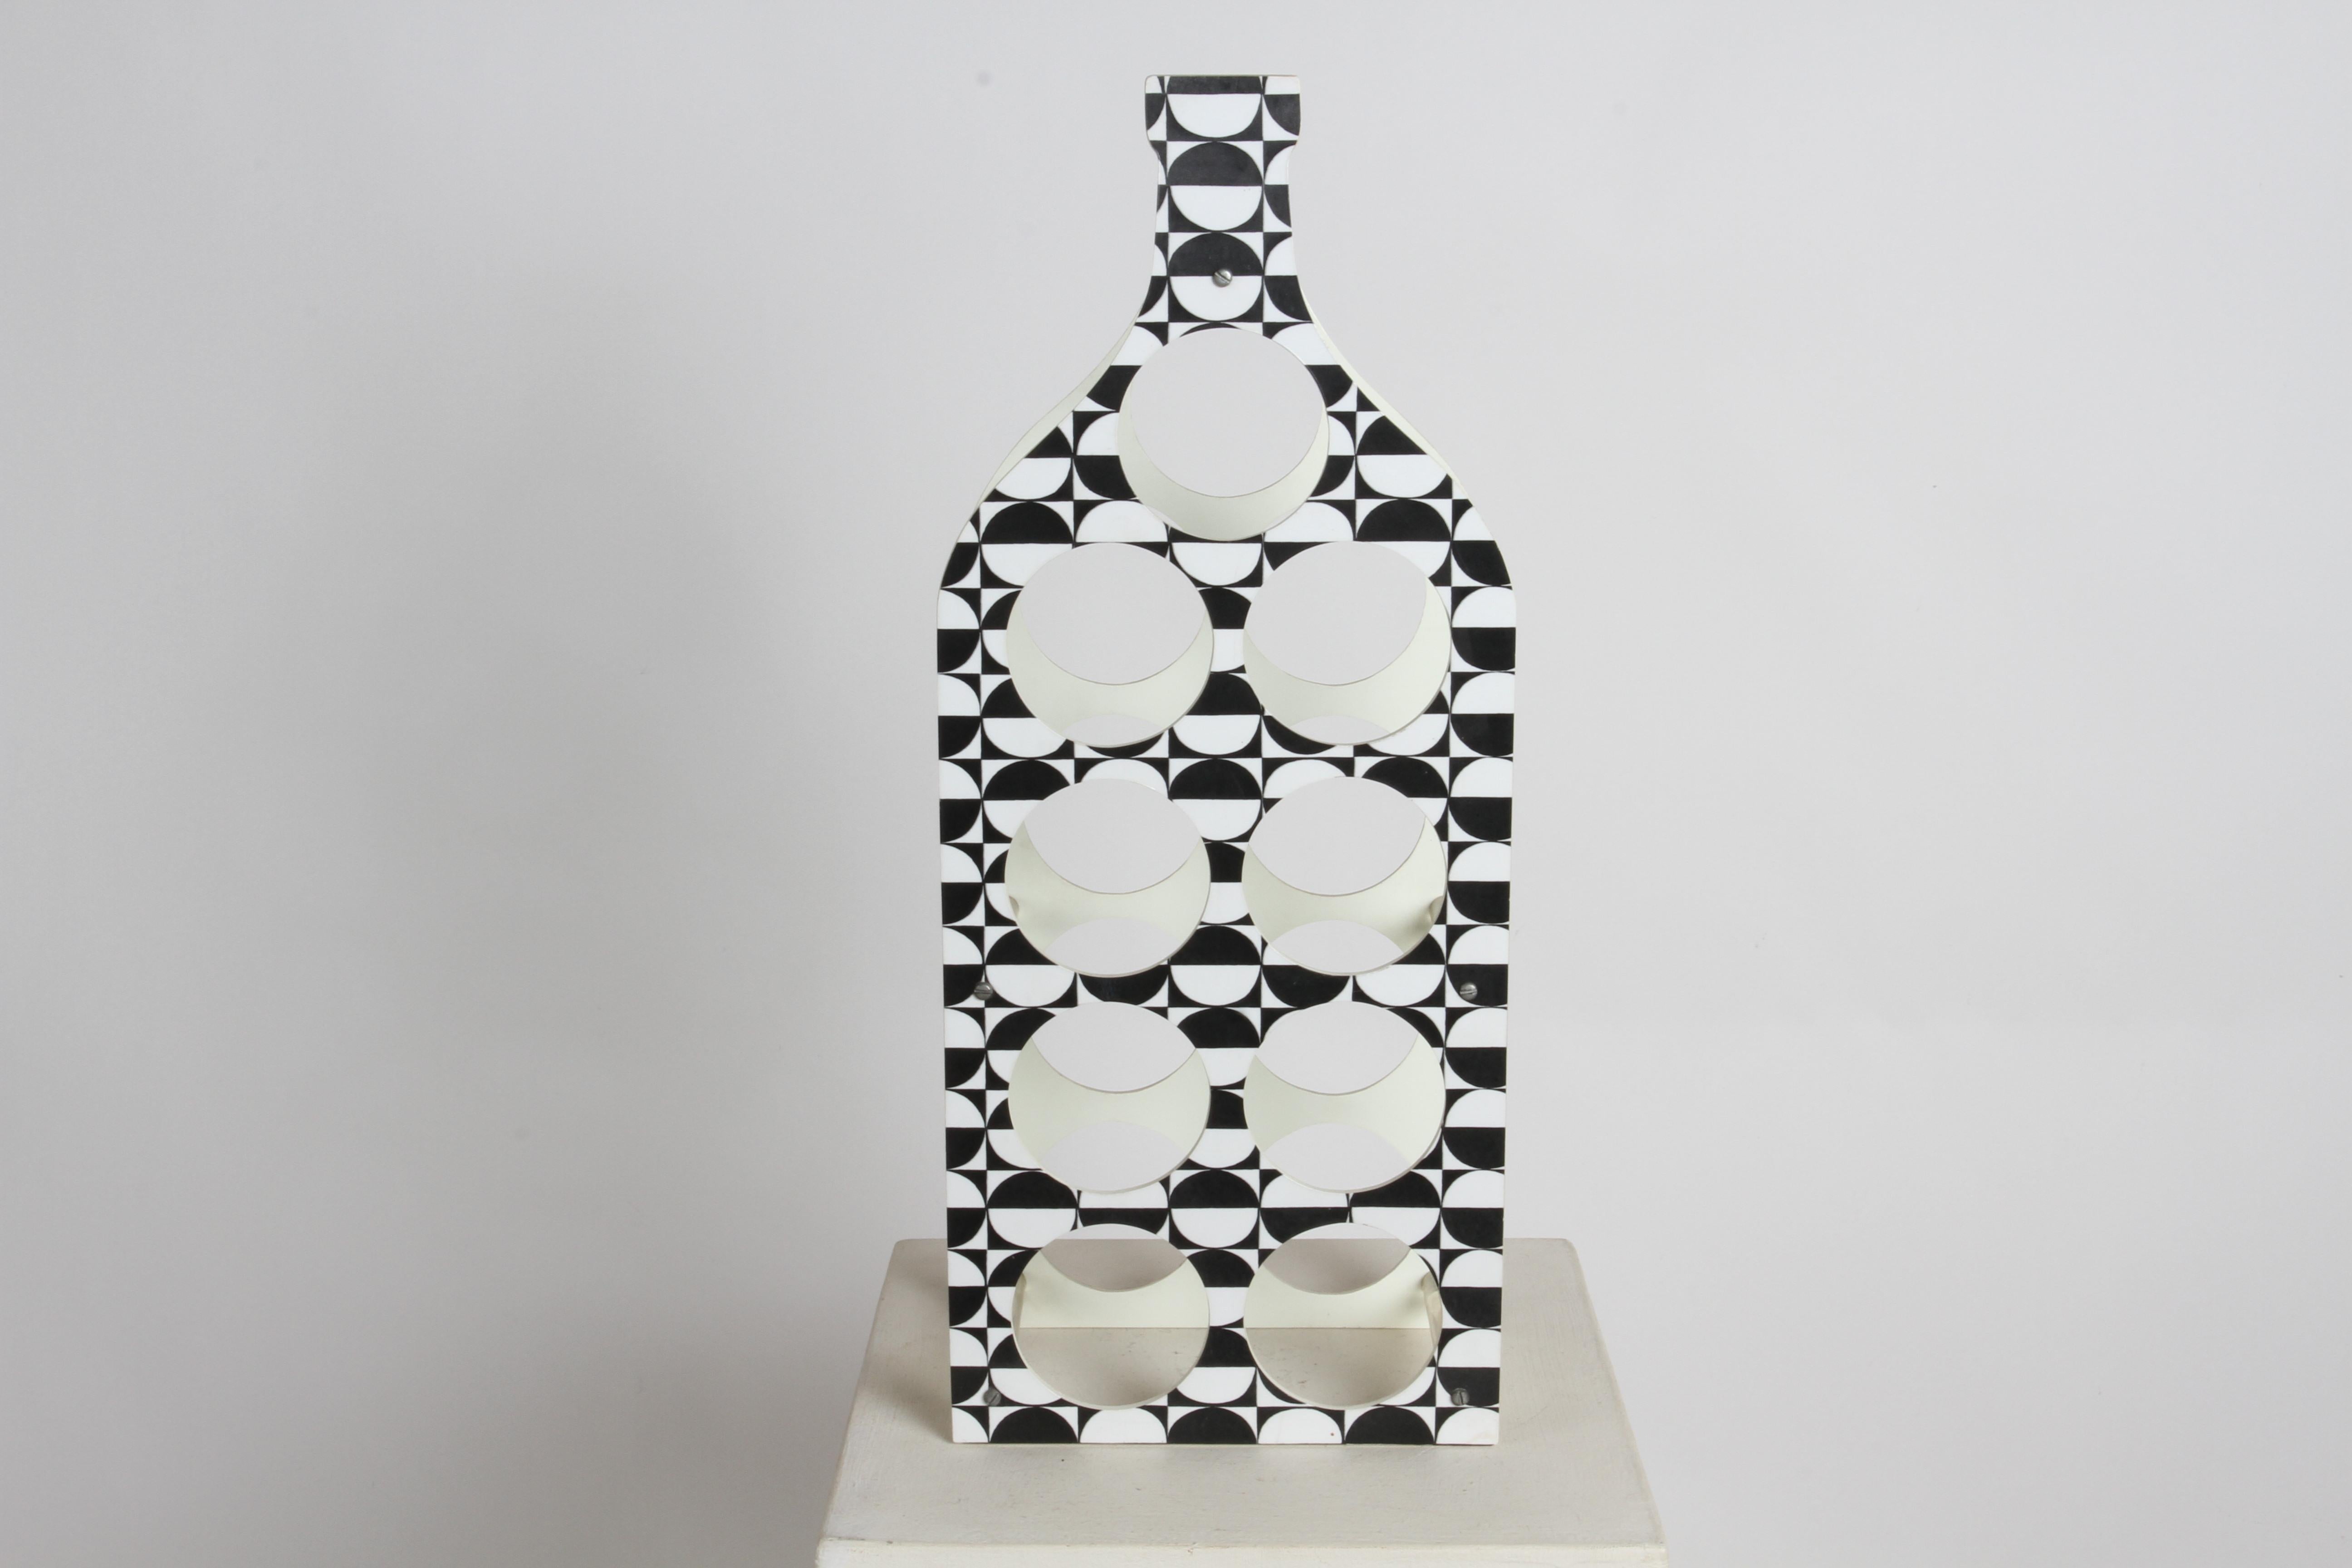 Wonderful Vasarely style Acrylic & Lucite bottle form wine rack holder with b&w printed Op-Art pattern on front panel. This Mid-Century Modern wine bottle holder was designed by Jean Gates Fifth Ave. Accessories New York in the 1960s. Holds 9